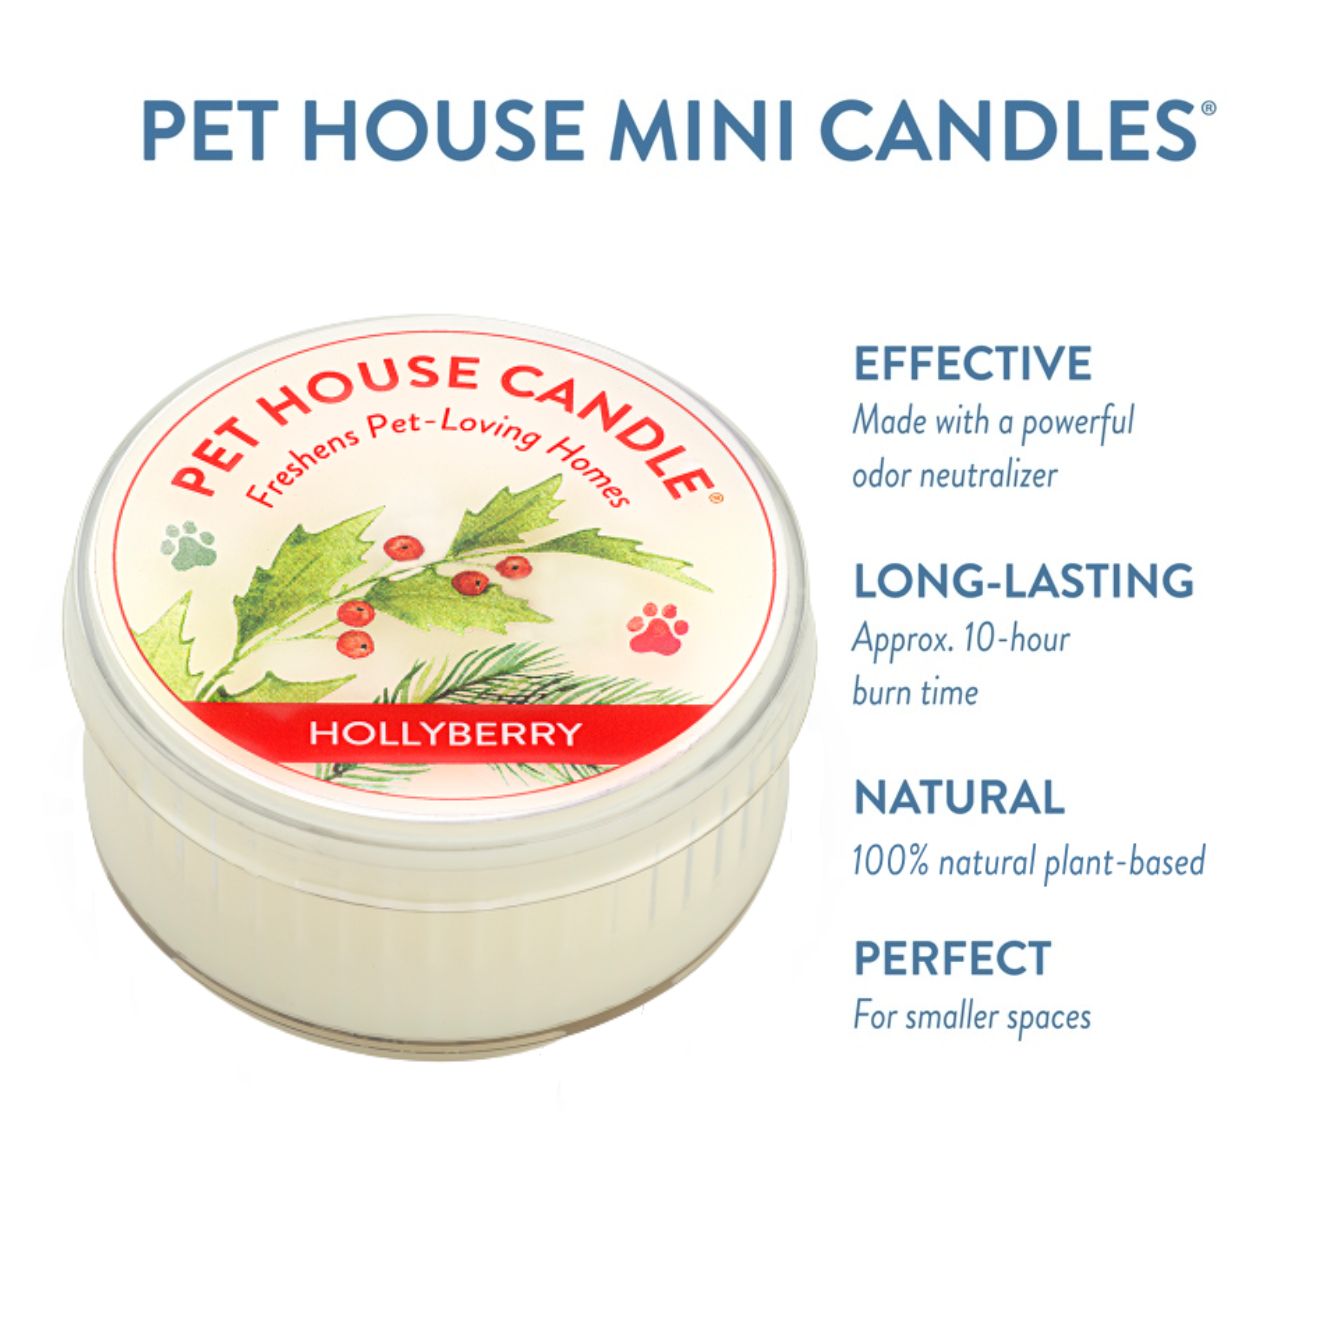 Hollyberry Mini Candle infographics